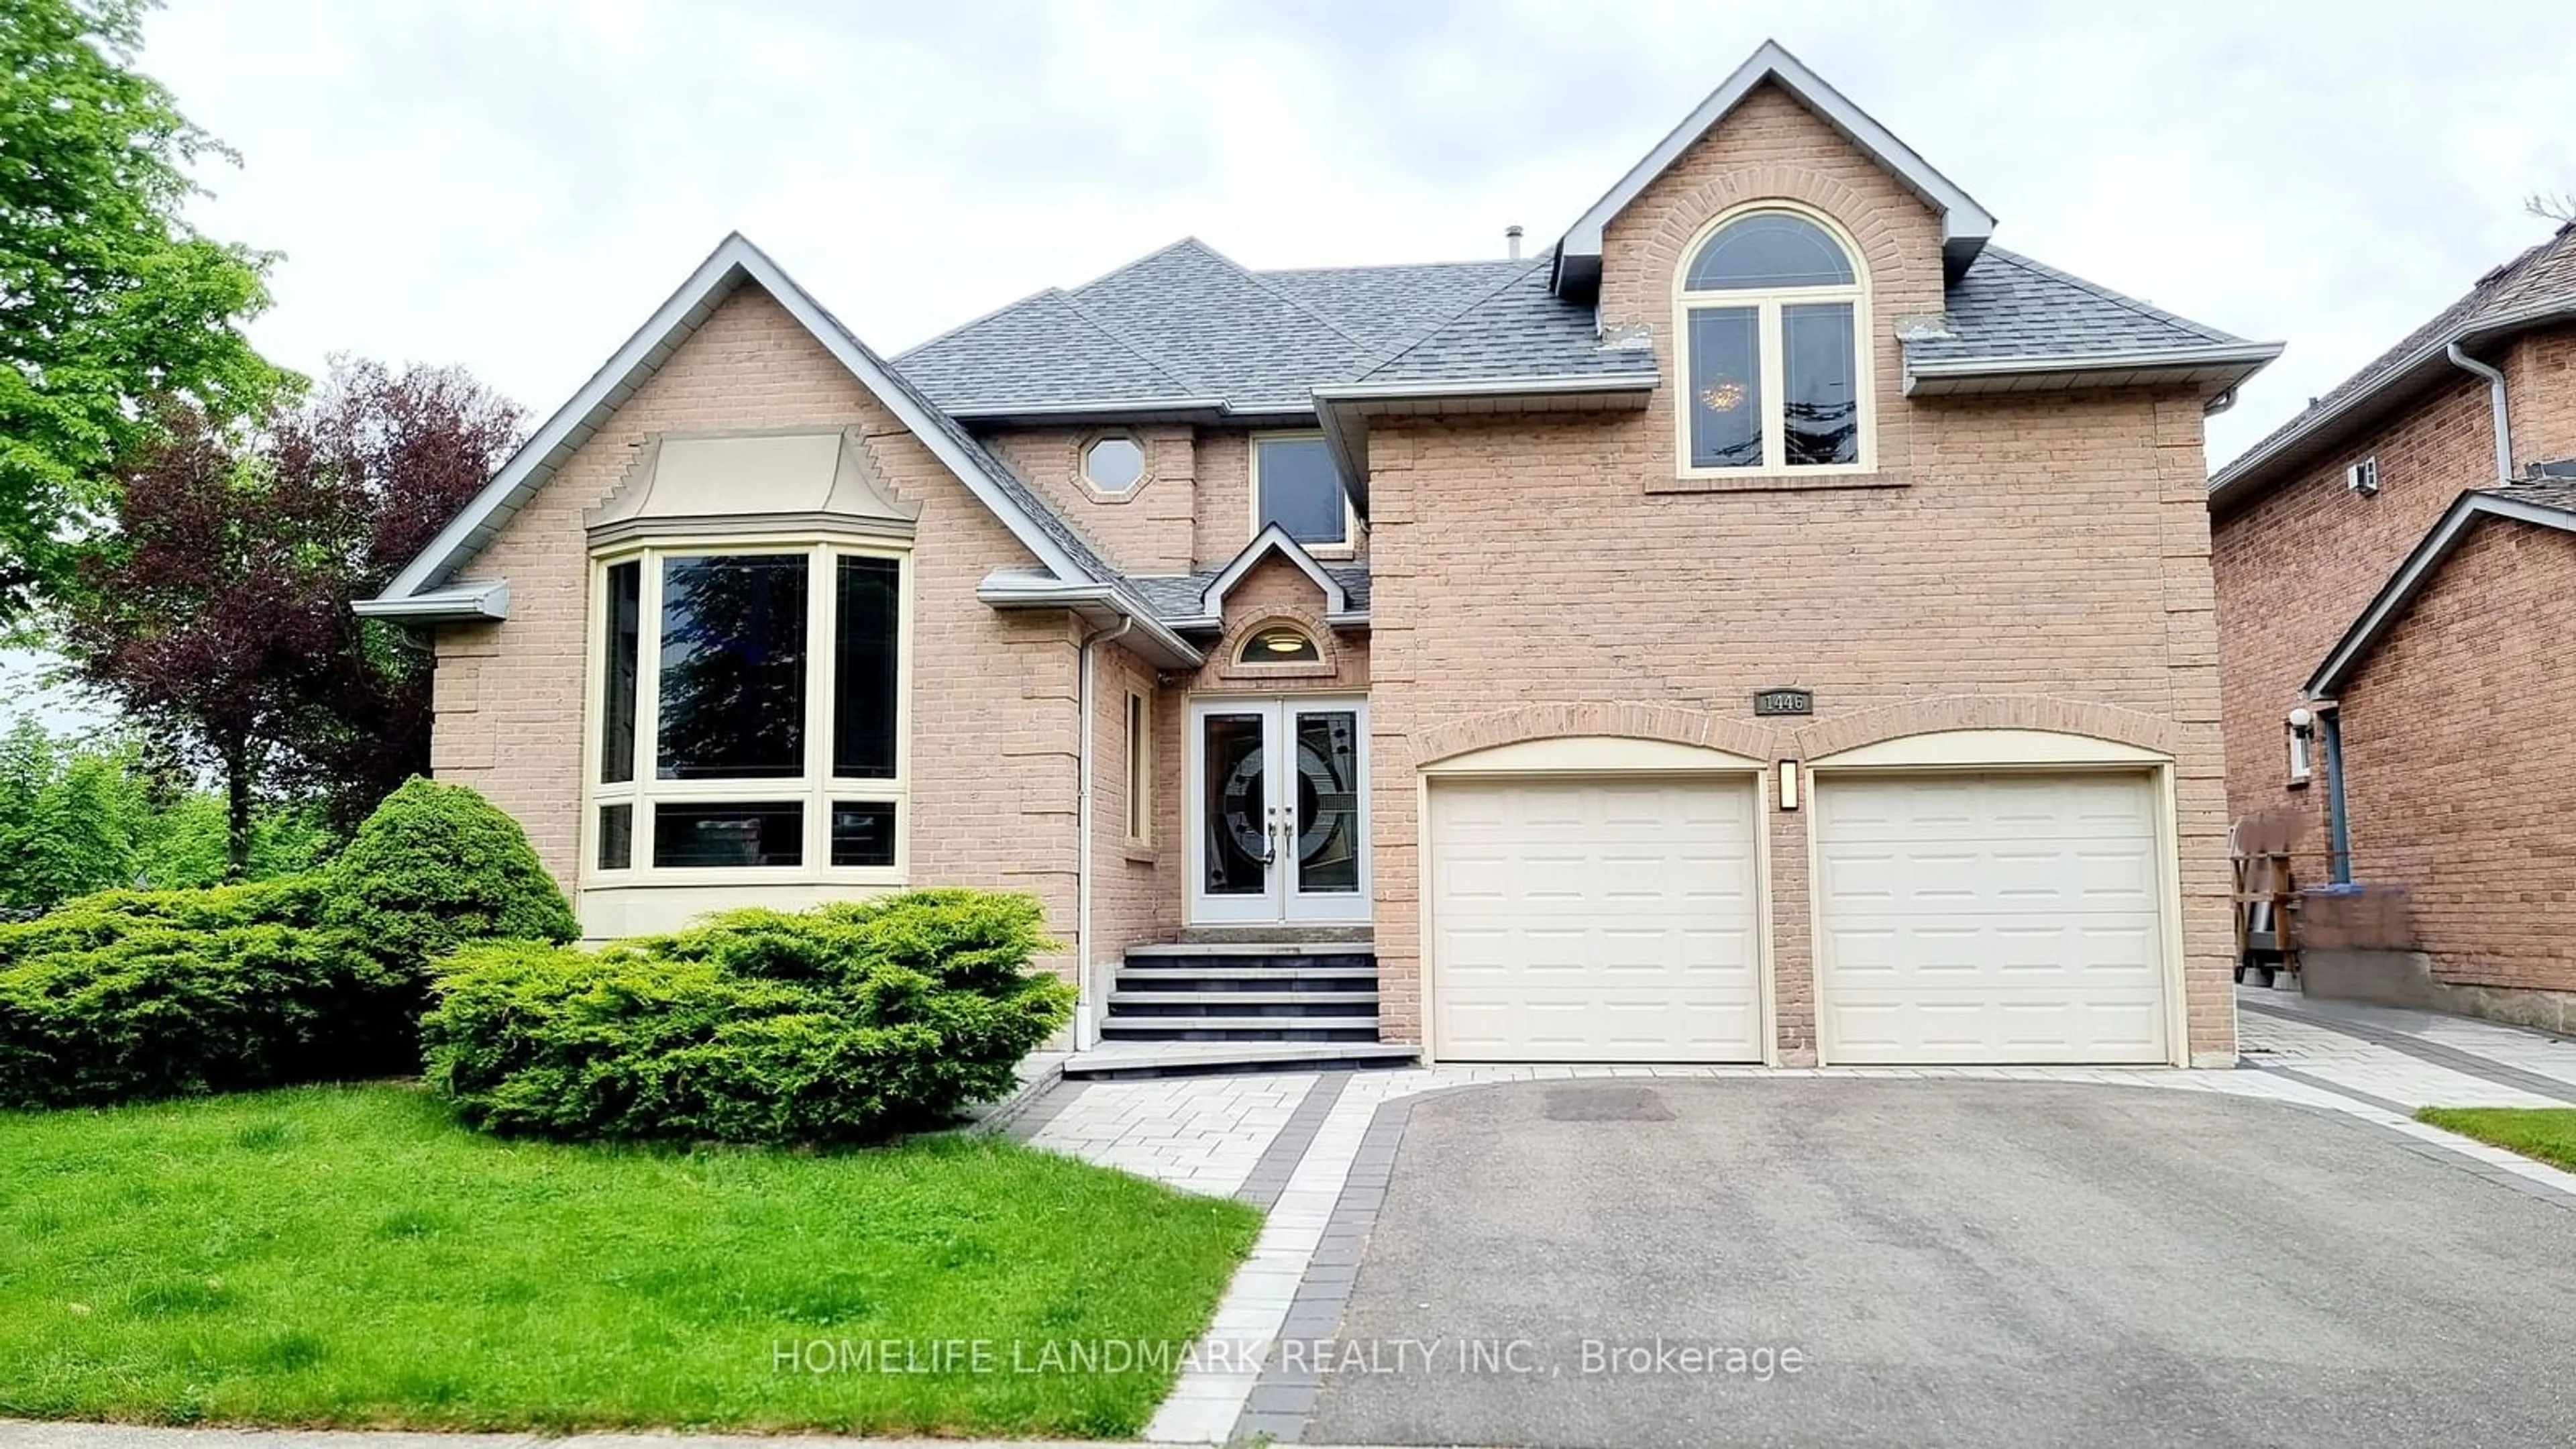 Home with brick exterior material for 1446 Tillingham Gdns, Mississauga Ontario L5M 3J6